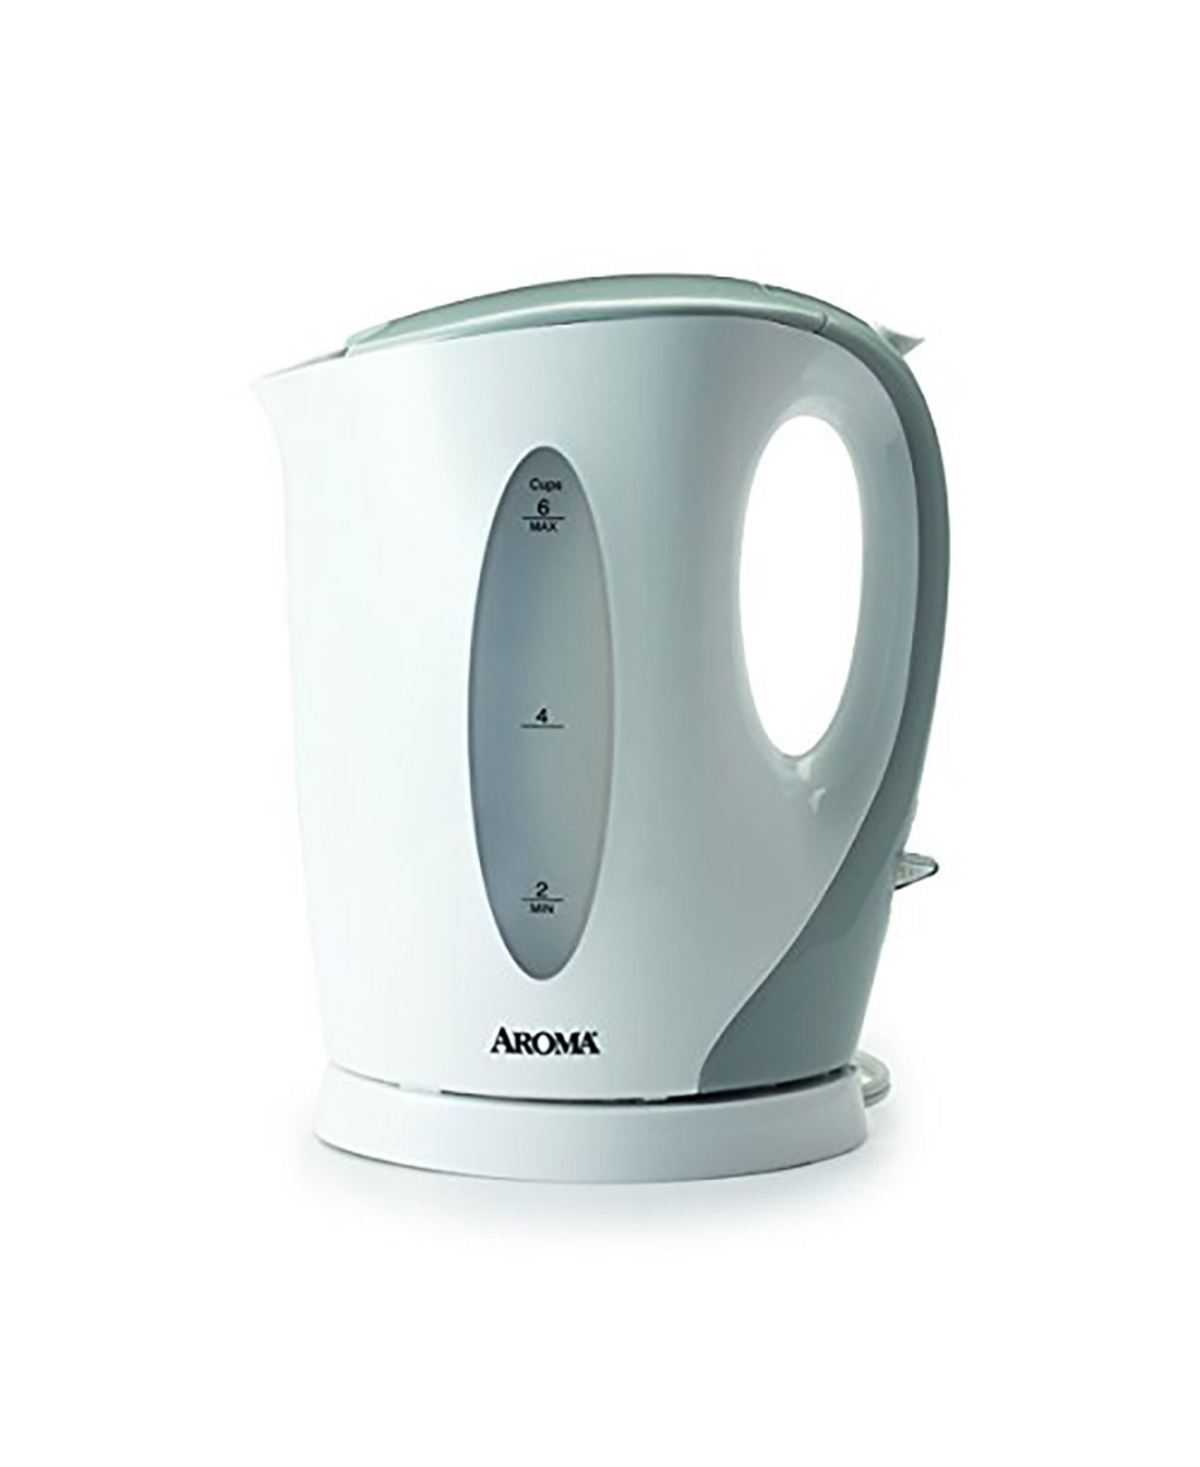 Aroma Awk-105 1.5-Liter Electric Kettle